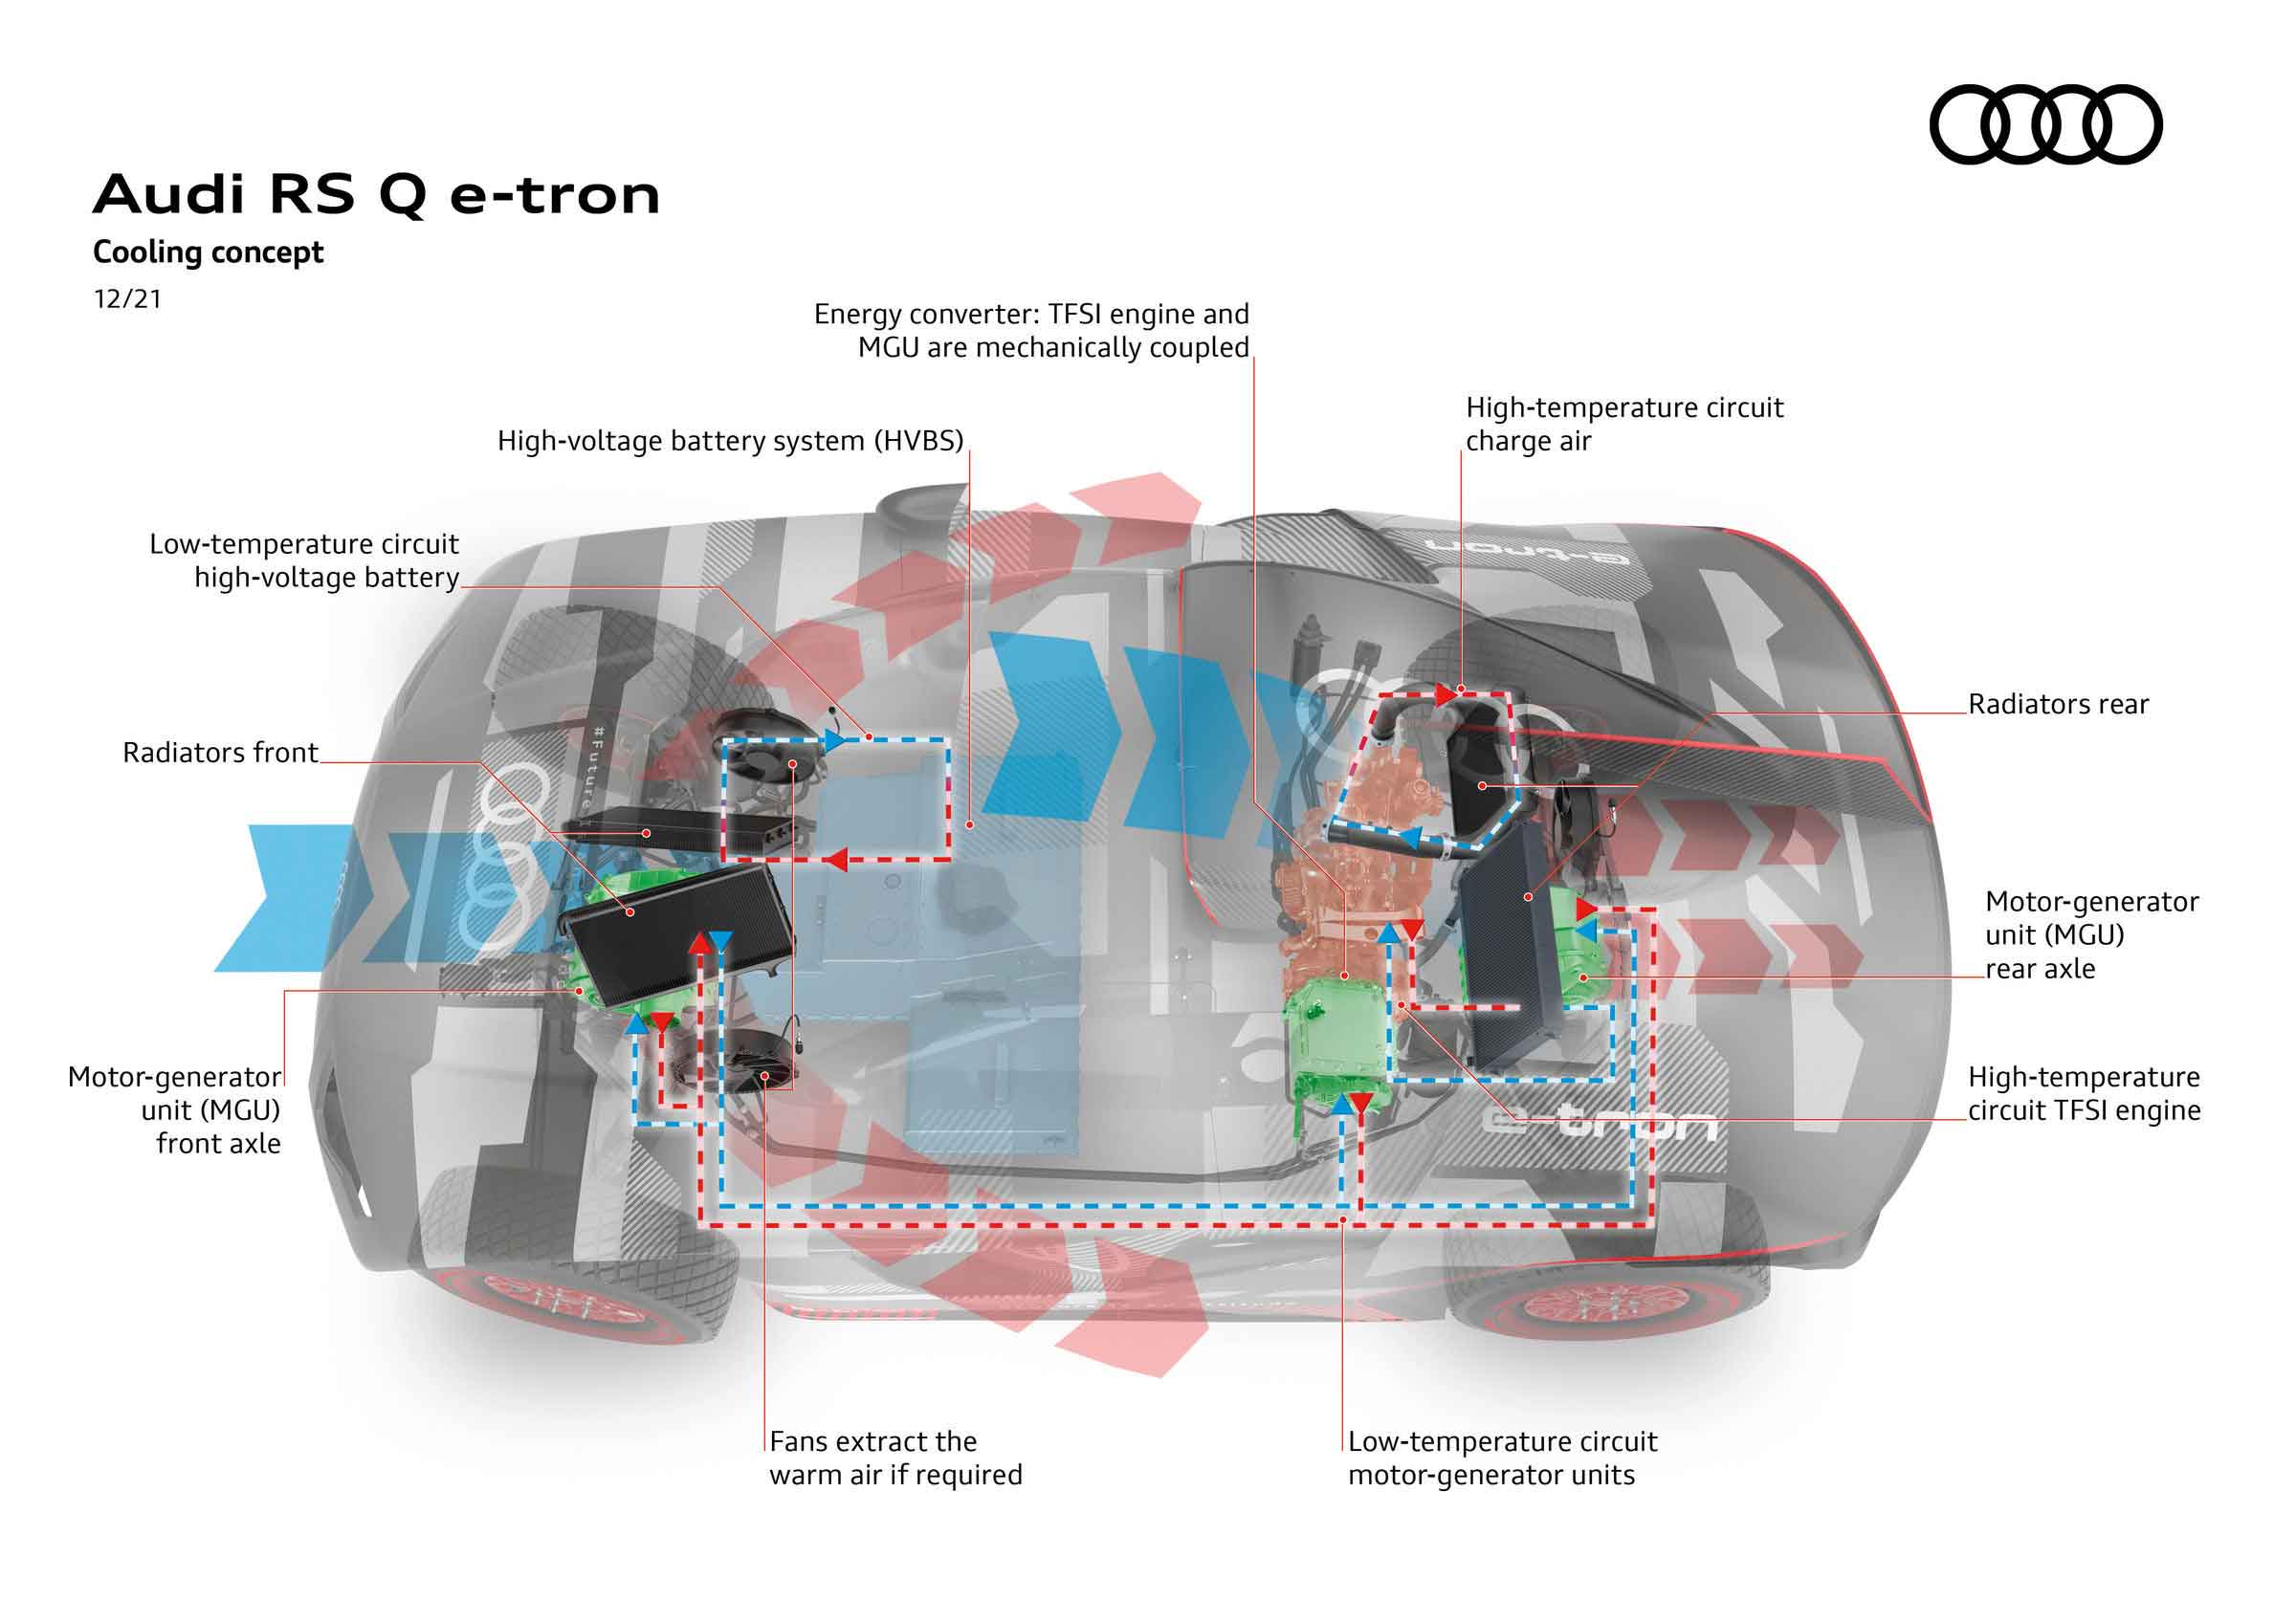 Complex cooling systems for the Dakar Rally in the Audi RS Q e-tron